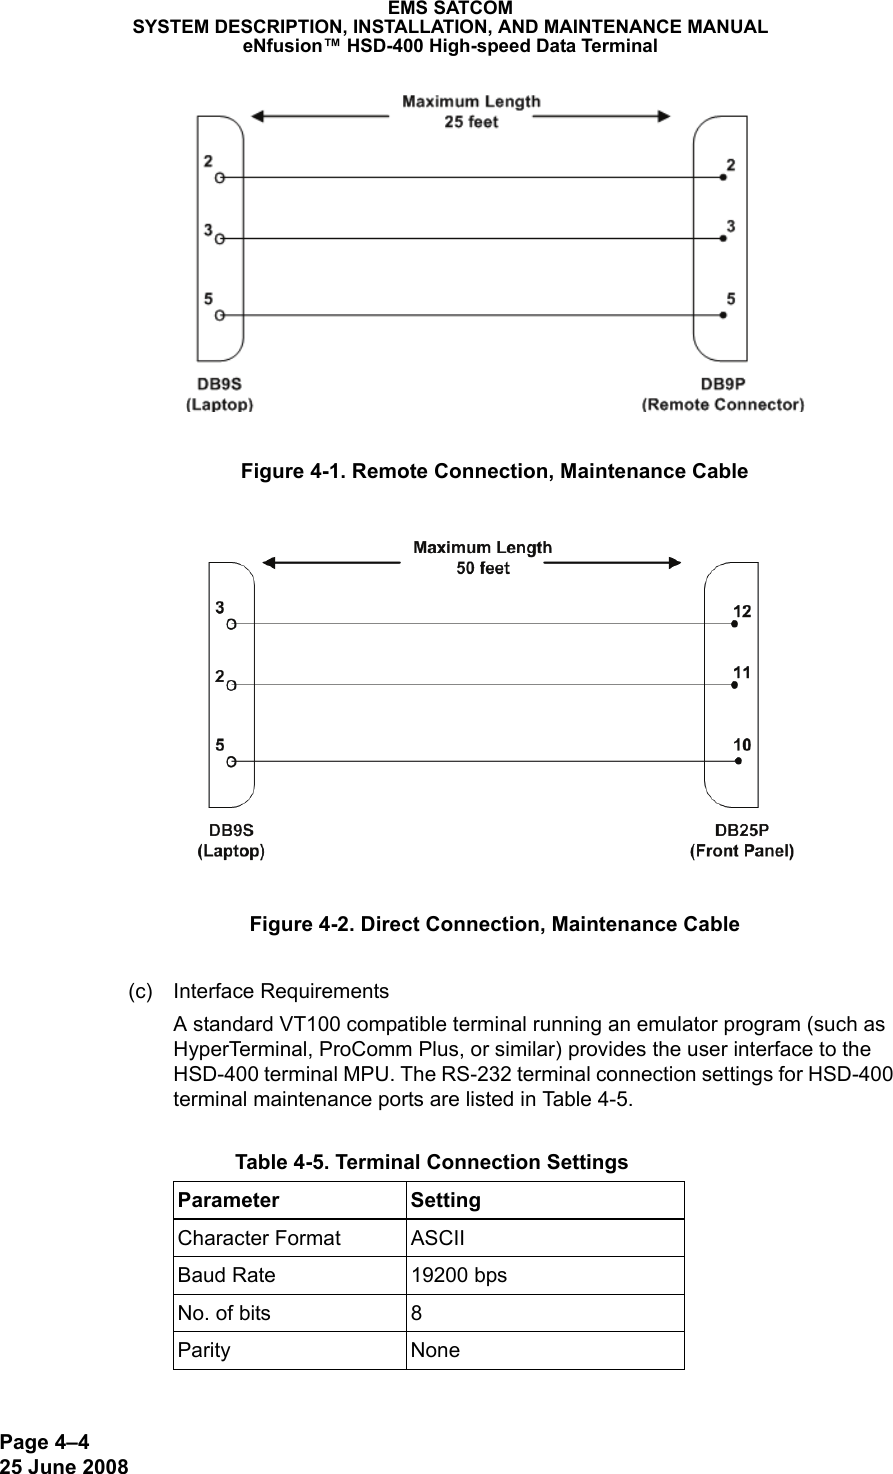 Page 4–425 June 2008EMS SATCOMSYSTEM DESCRIPTION, INSTALLATION, AND MAINTENANCE MANUALeNfusion™ HSD-400 High-speed Data TerminalFigure 4-1. Remote Connection, Maintenance CableFigure 4-2. Direct Connection, Maintenance Cable(c) Interface RequirementsA standard VT100 compatible terminal running an emulator program (such as HyperTerminal, ProComm Plus, or similar) provides the user interface to the HSD-400 terminal MPU. The RS-232 terminal connection settings for HSD-400 terminal maintenance ports are listed in Tab l e  4-5. Table 4-5. Terminal Connection SettingsParameter SettingCharacter Format ASCIIBaud Rate 19200 bpsNo. of bits 8Parity None